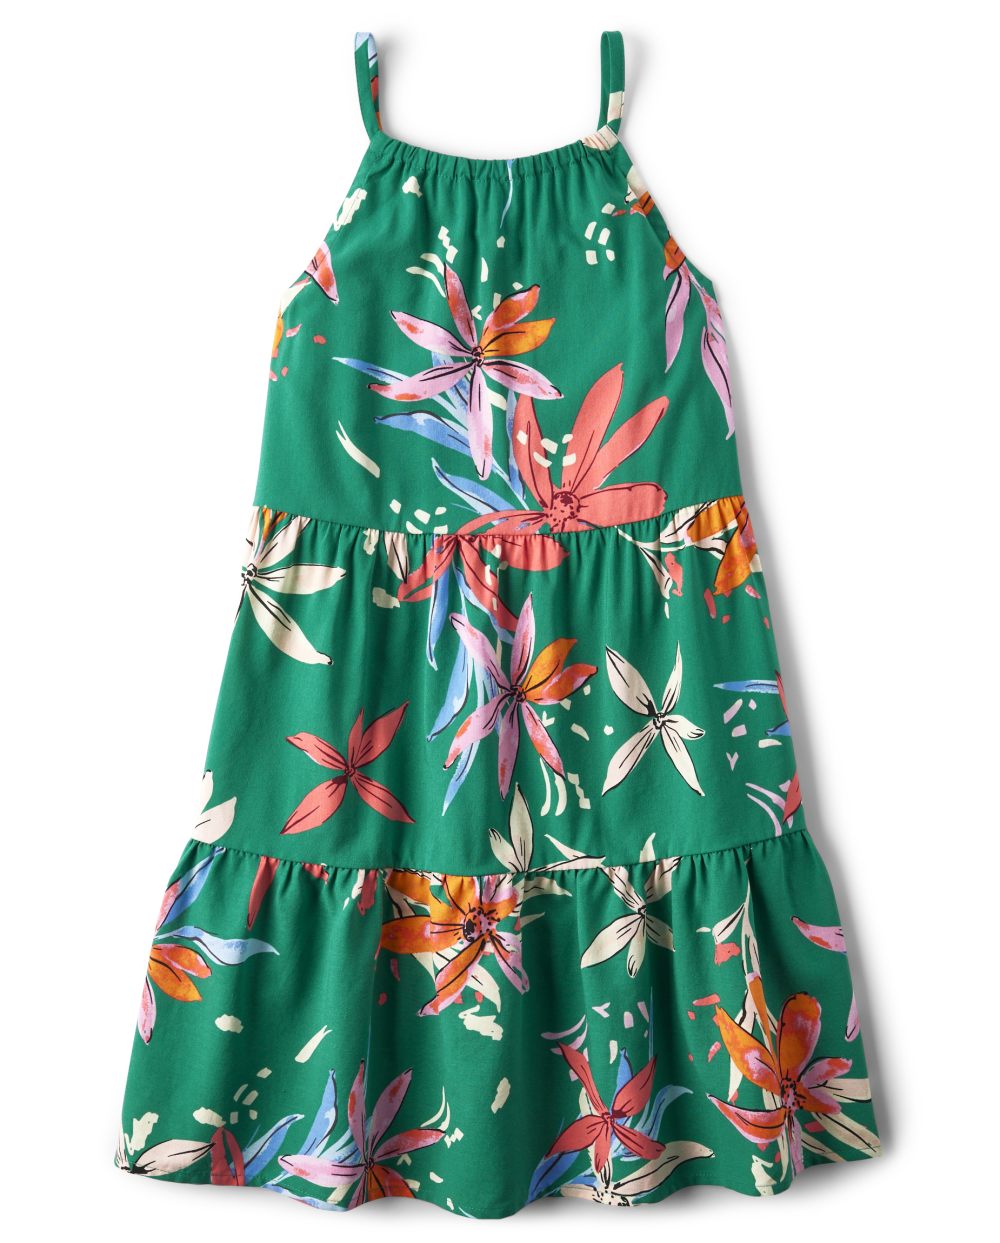 Girls Halter Floral Tropical Print Tiered Above the Knee Sleeveless Dress